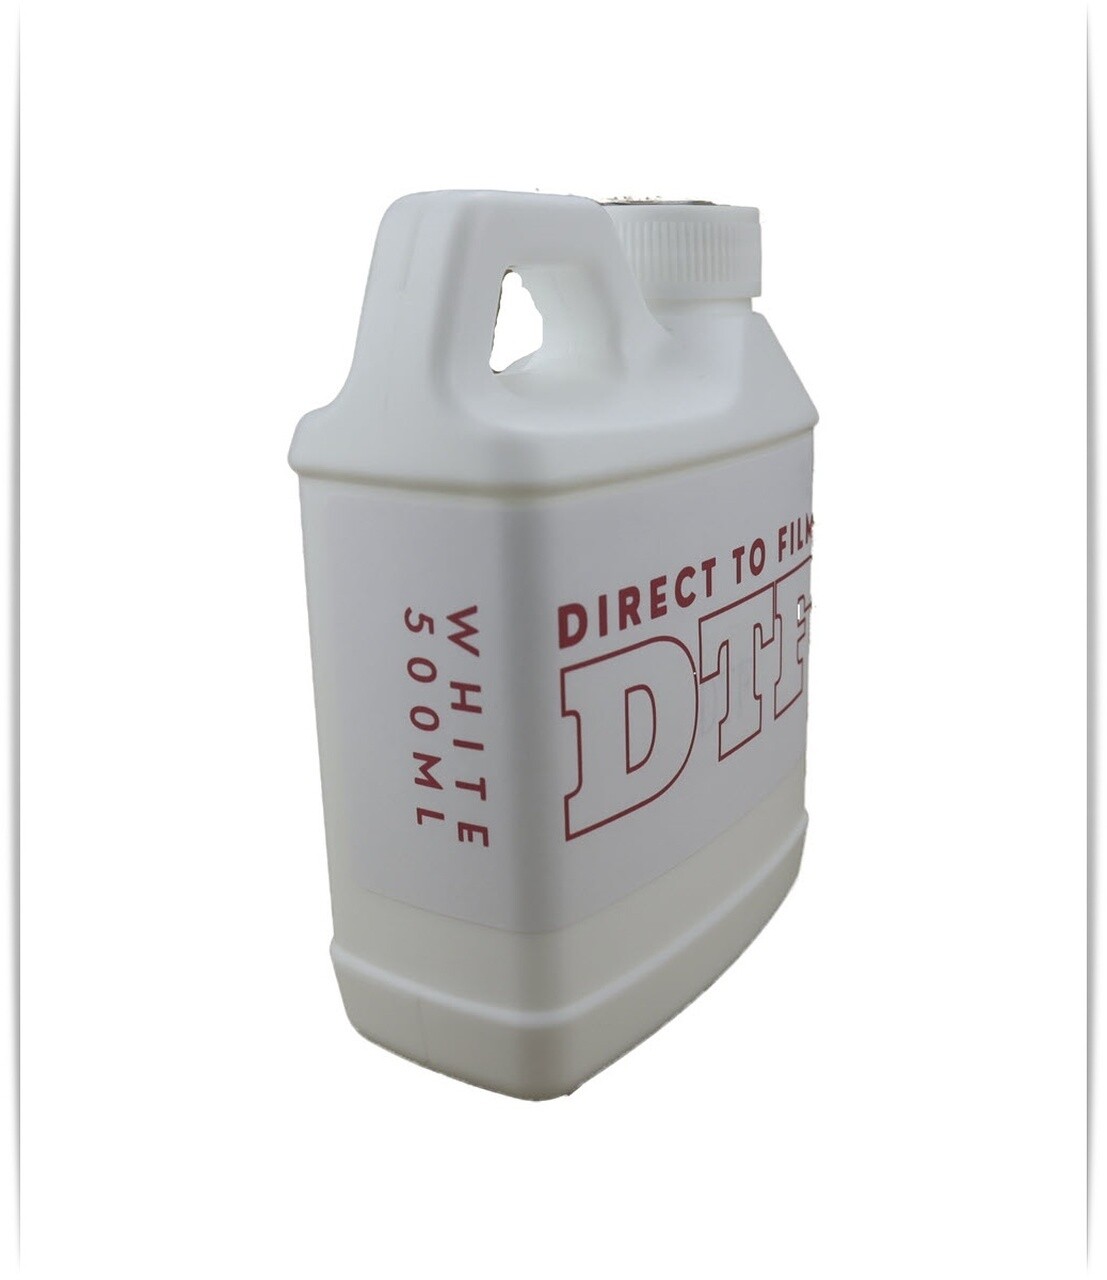 White DTF Ink Direct To Film 500ml Bottle for Epson, Epson Print Head printers